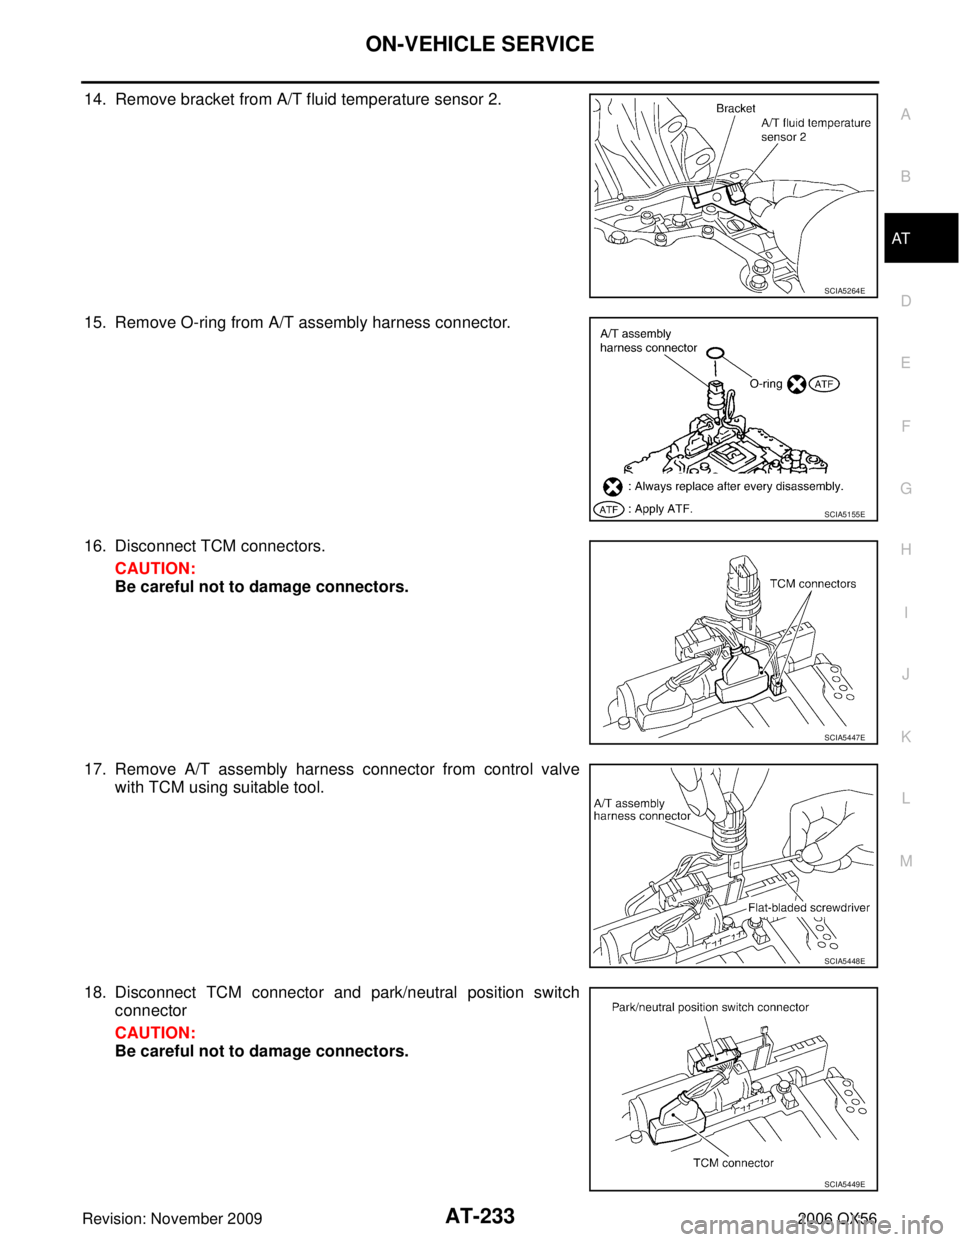 INFINITI QX56 2006  Factory Service Manual ON-VEHICLE SERVICEAT-233
DE
F
G H
I
J
K L
M A
B
AT
Revision: November 2009 2006 QX56
14. Remove bracket from A/T fluid temperature sensor 2.
15. Remove O-ring from A/T assembly harness connector.
16. 